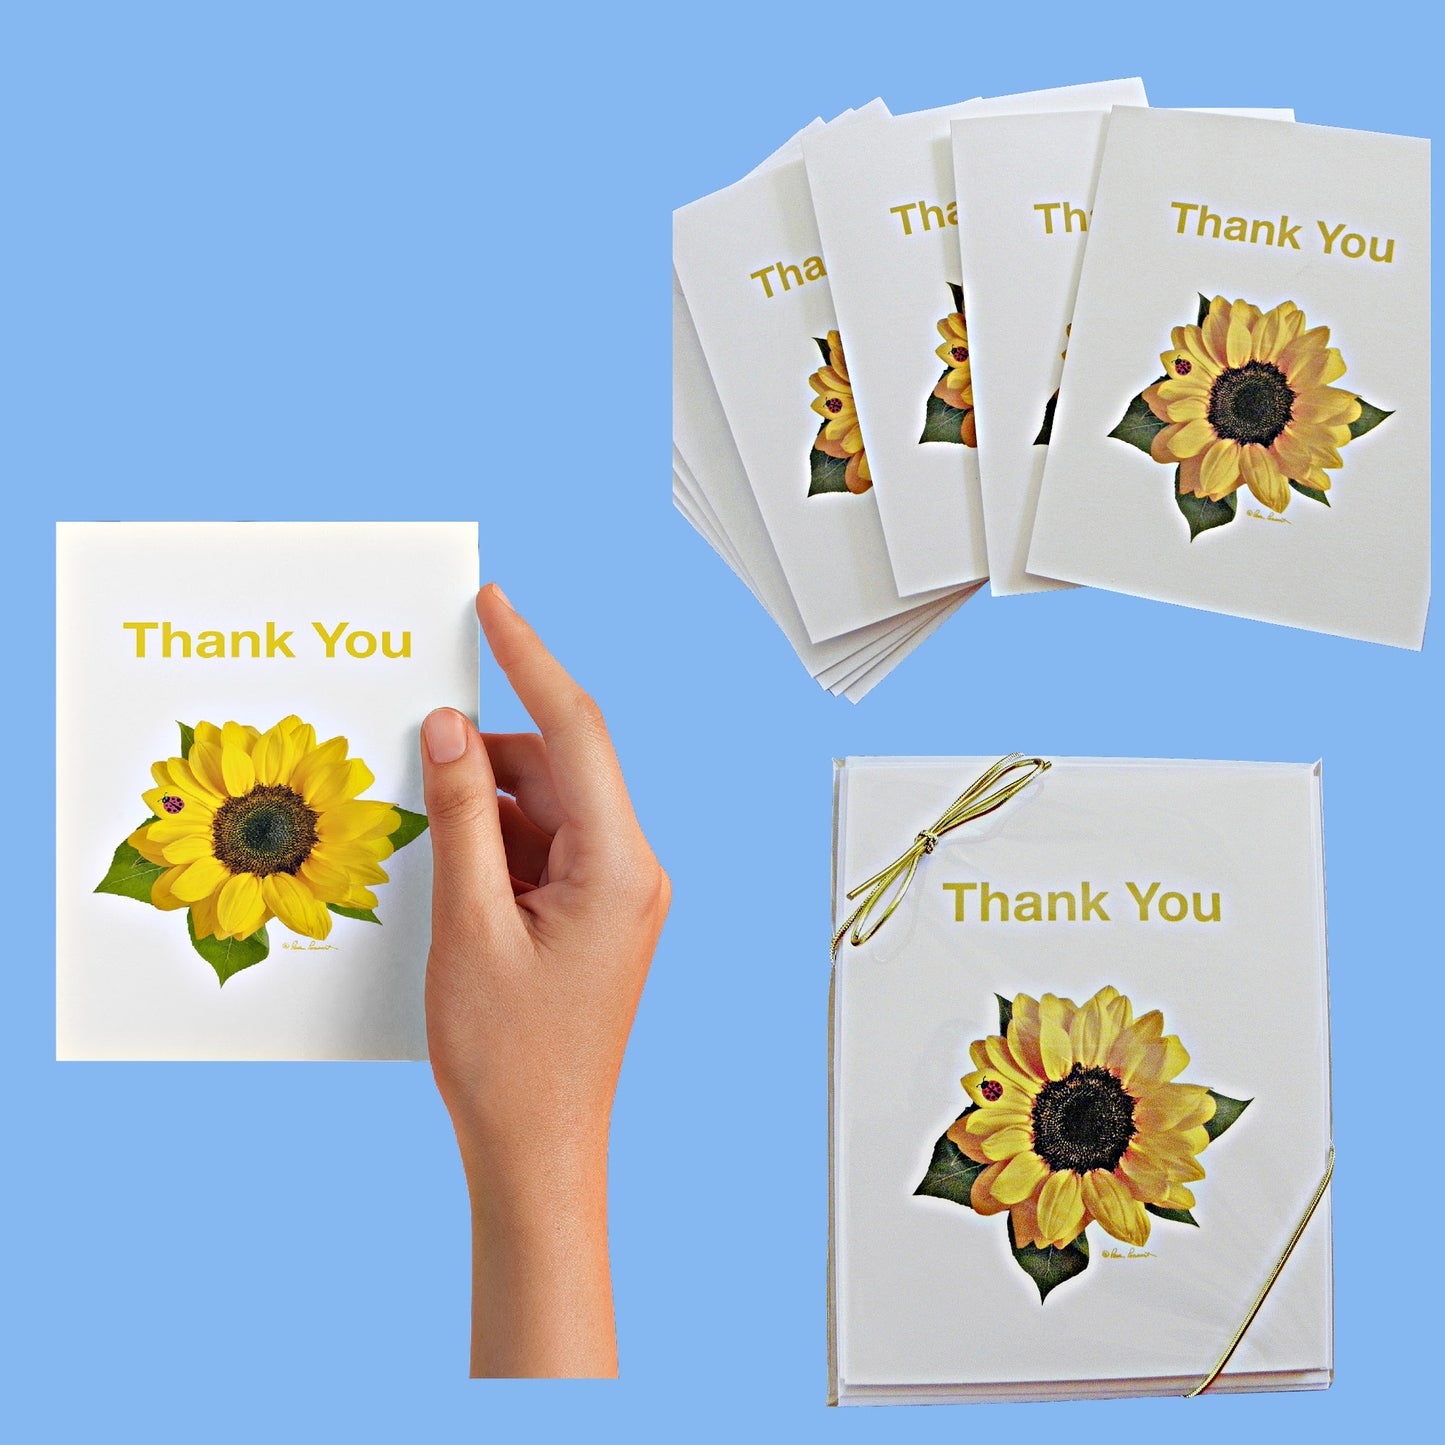 A collage featuring 3 views of the 4-pc. Thank-You Note Card set with a Sunflower design containing a cute little red ladybug